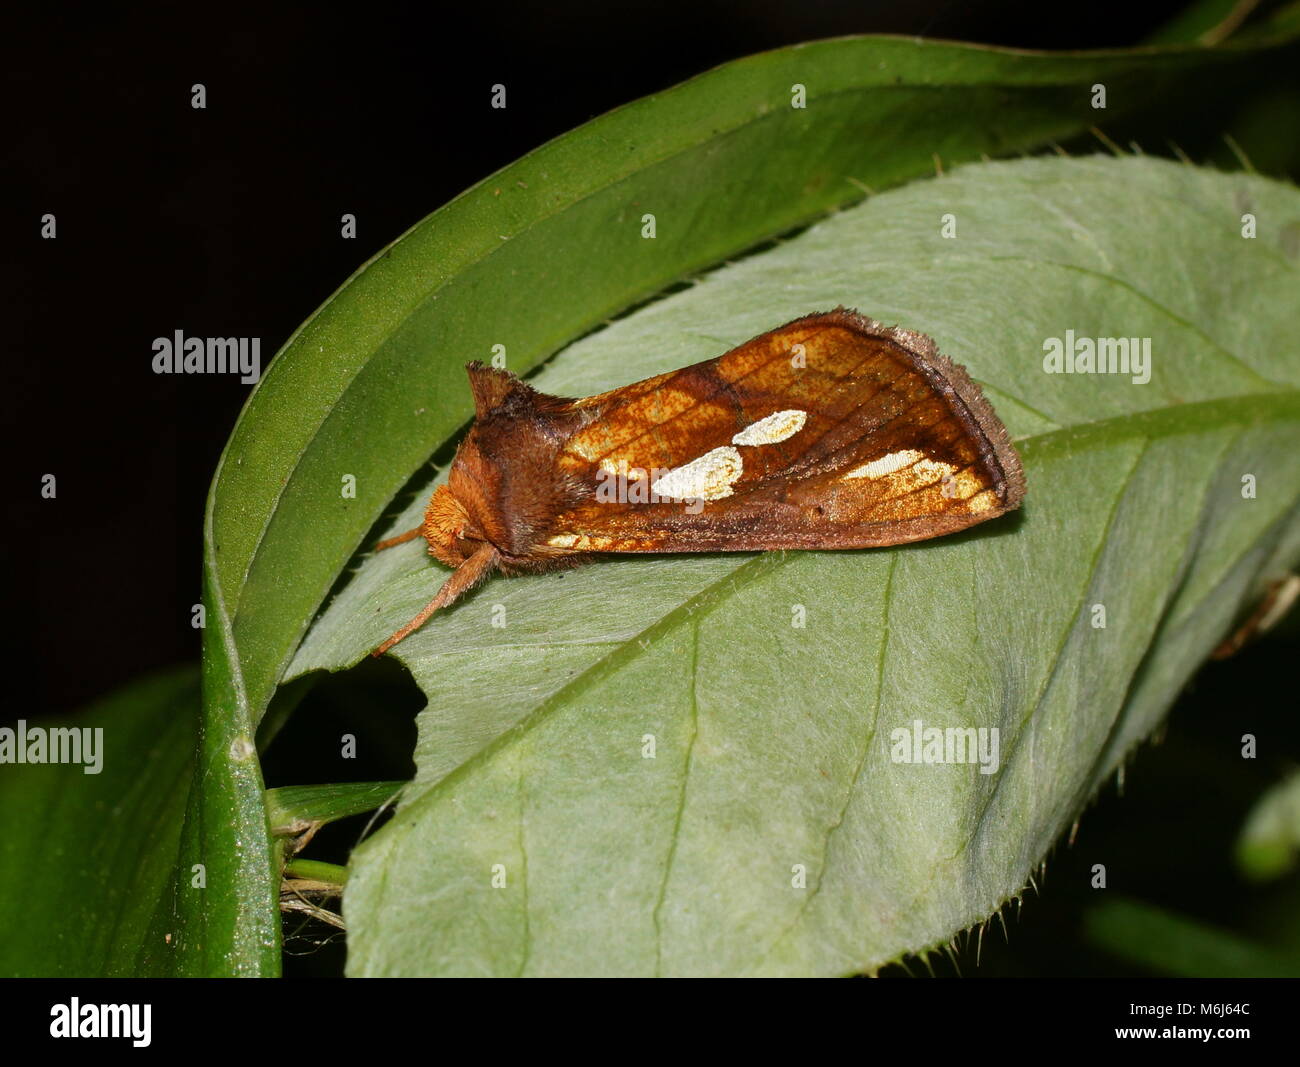 Plusia festucae (gold spot) is a species of moth of the family Noctuidae. Moth is sitting on a green leaf. Stock Photo